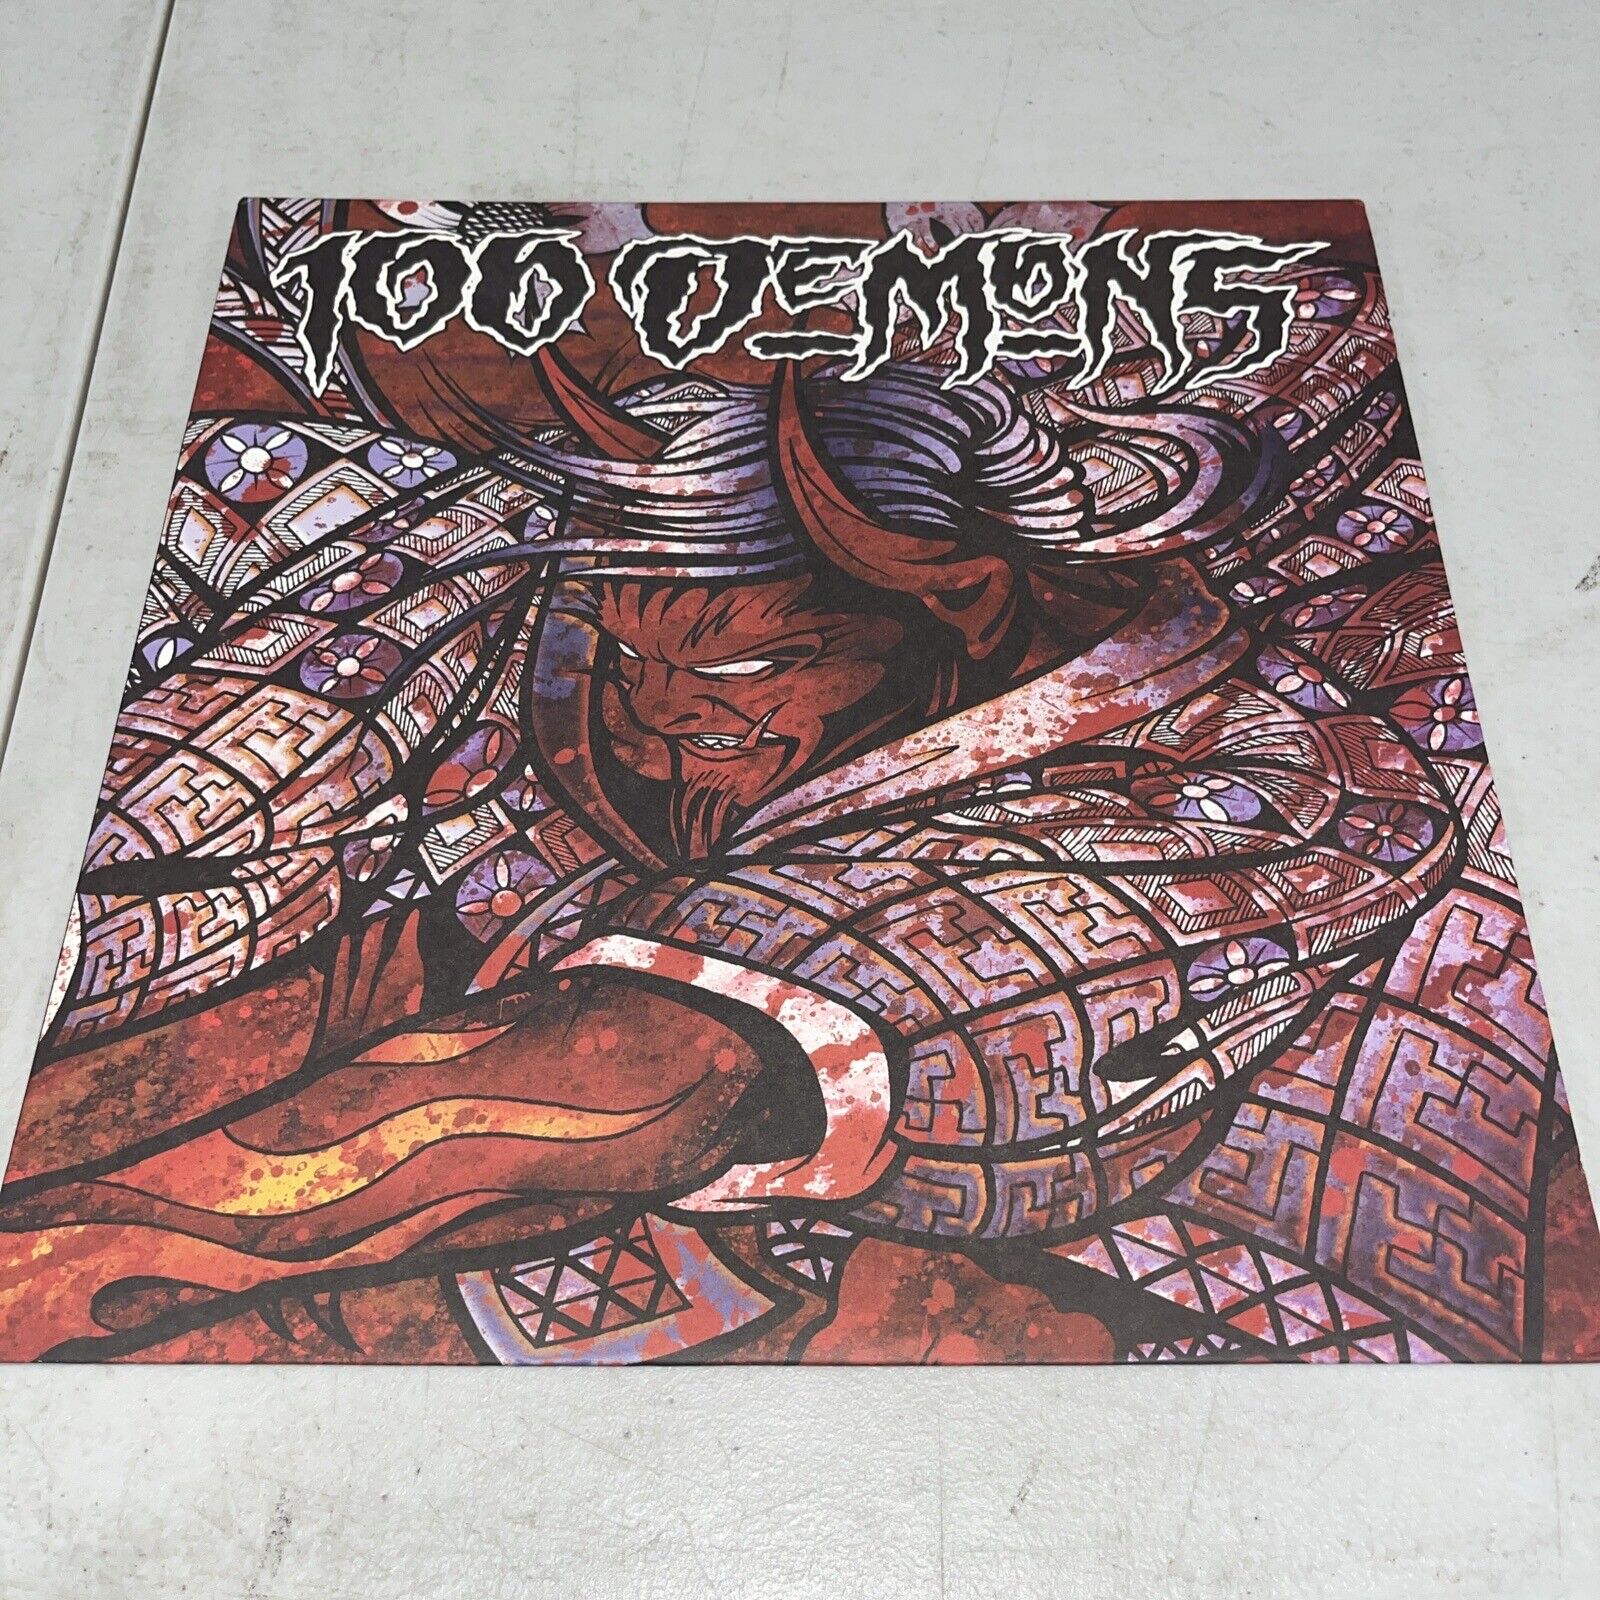 100 Demons by 100 Demons (Record, 2014)